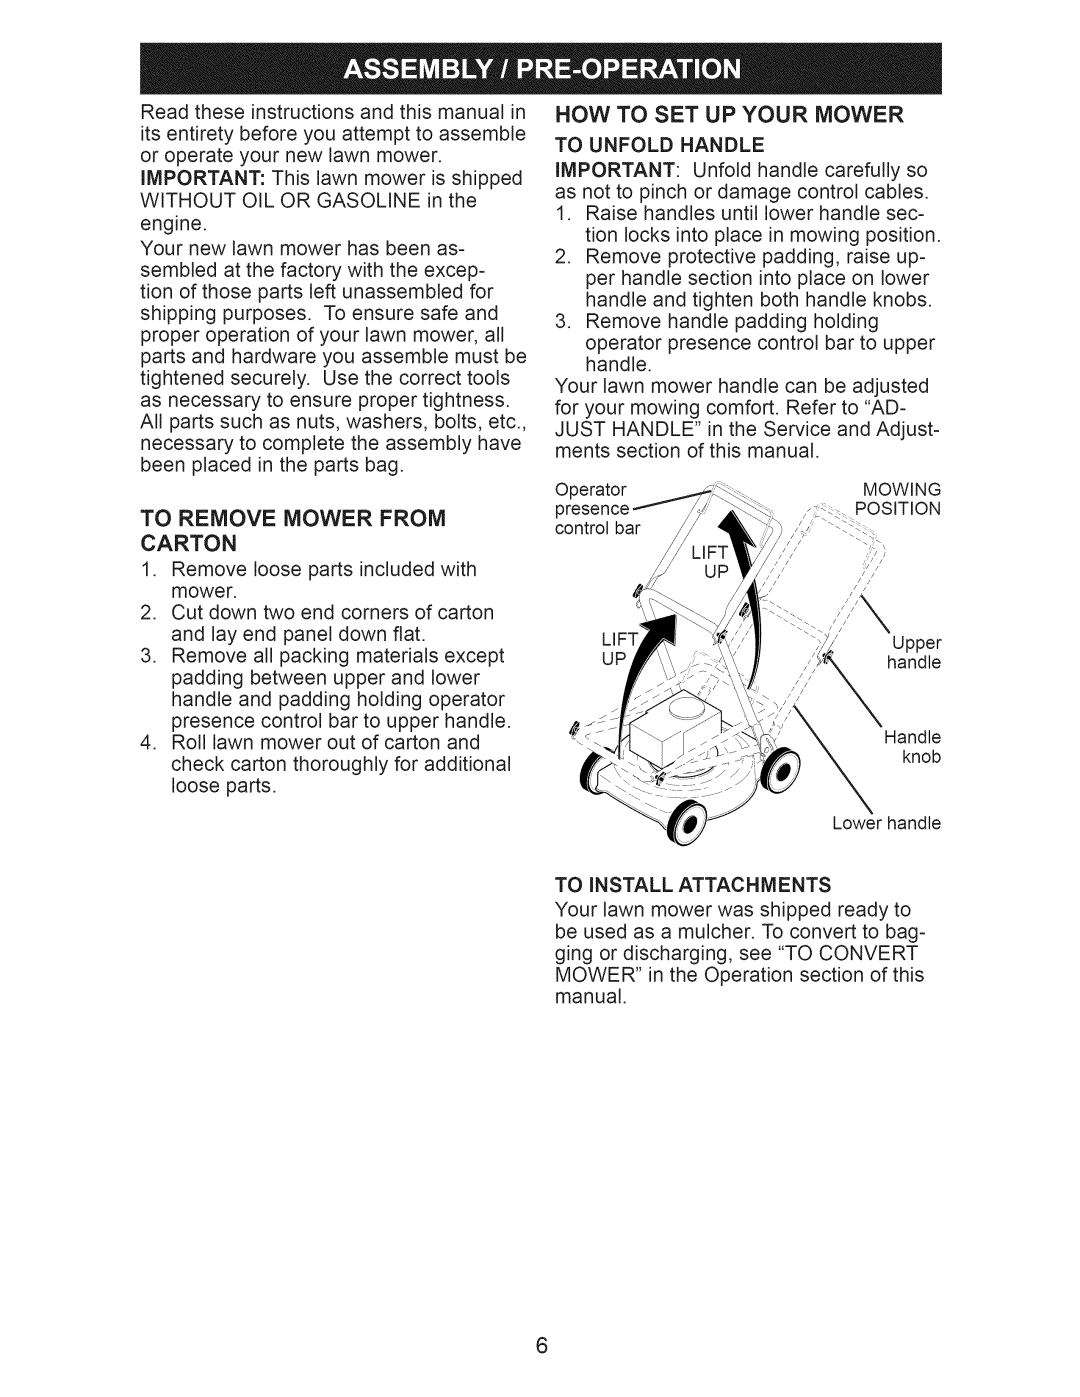 Craftsman 917.375010 owner manual To Remove Mower From Carton, Now To Set Up Your Mower 